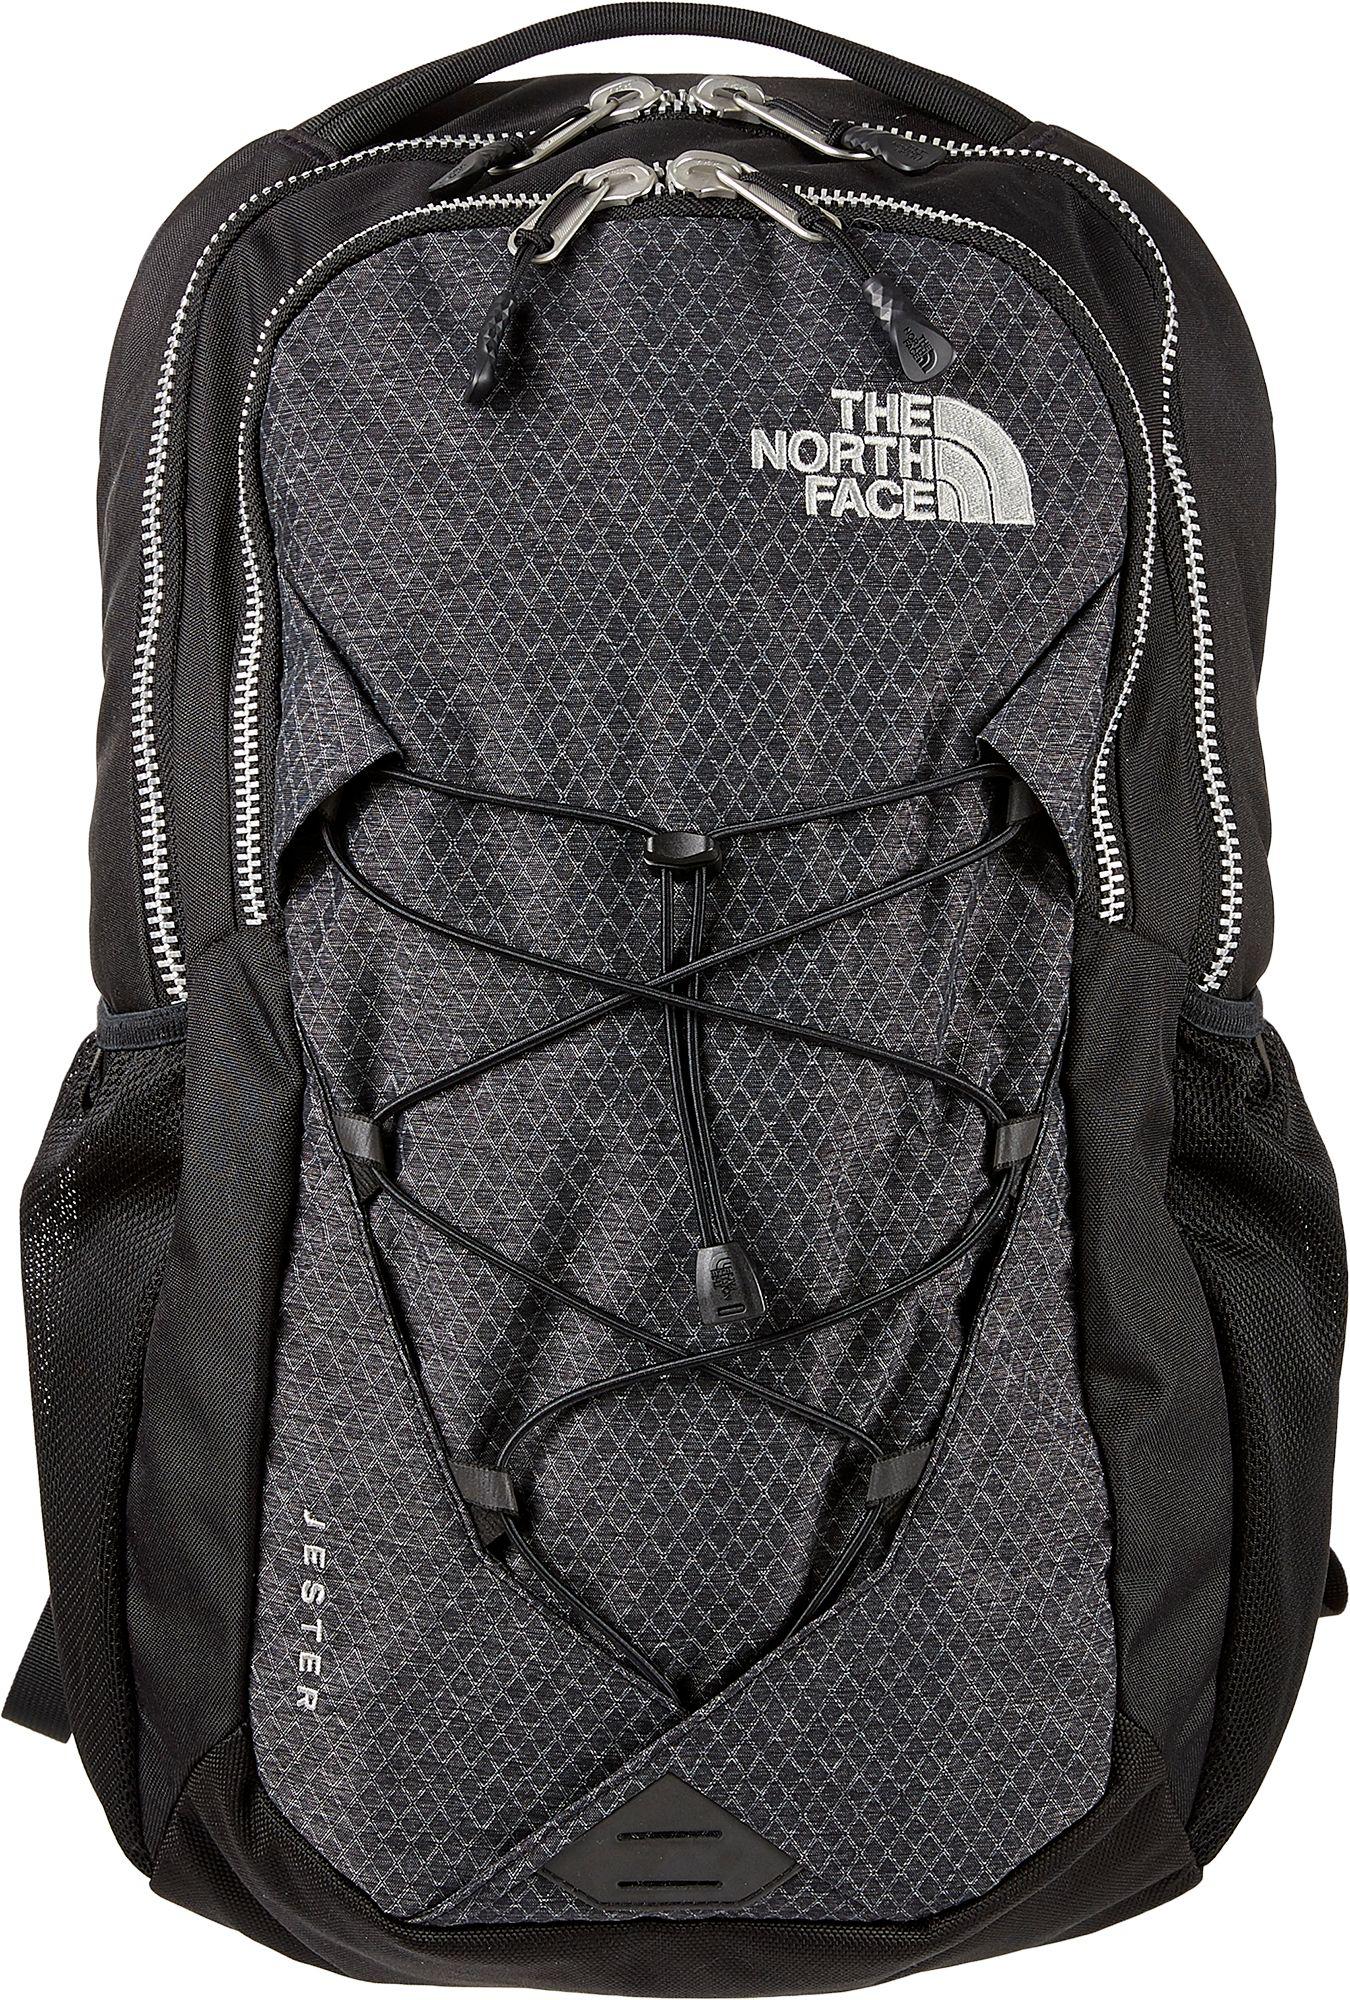 The North Face Jester Luxe Backpack in Black - Lyst